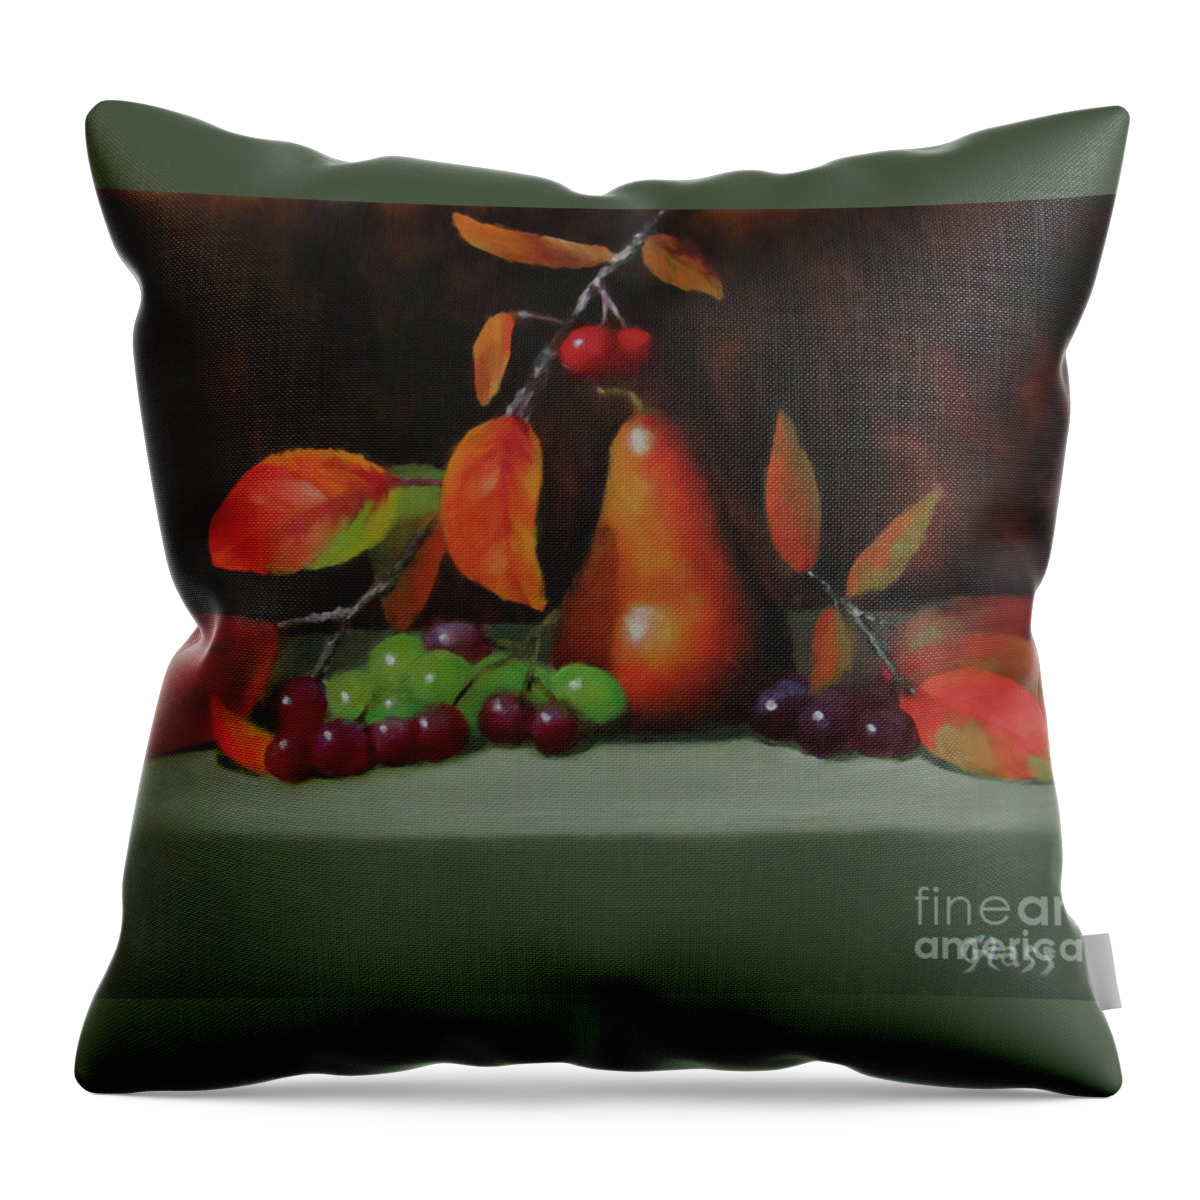 Fall Throw Pillow featuring the painting Fall Pear by Tina Glass